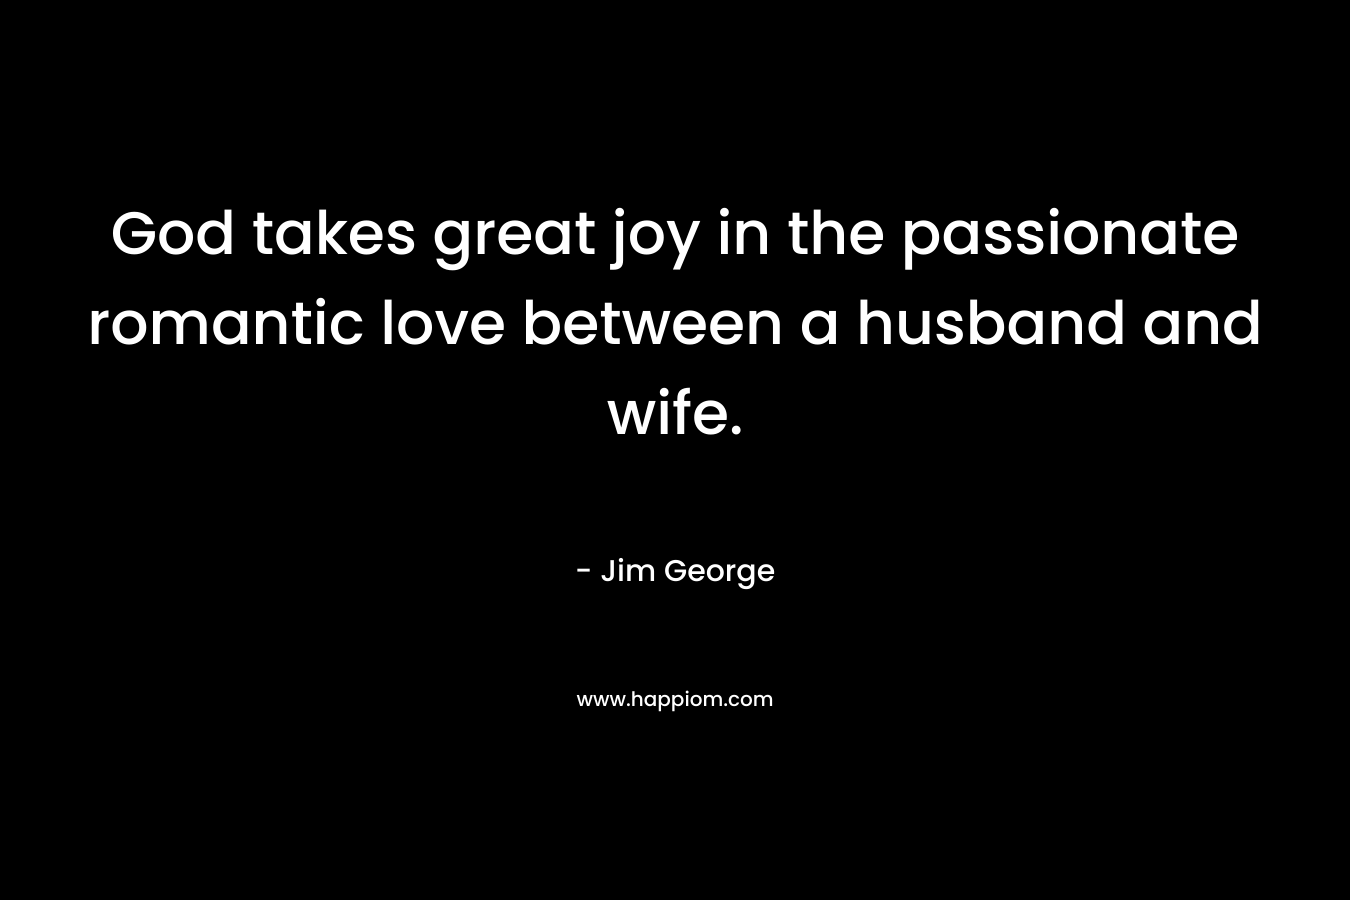 God takes great joy in the passionate romantic love between a husband and wife.